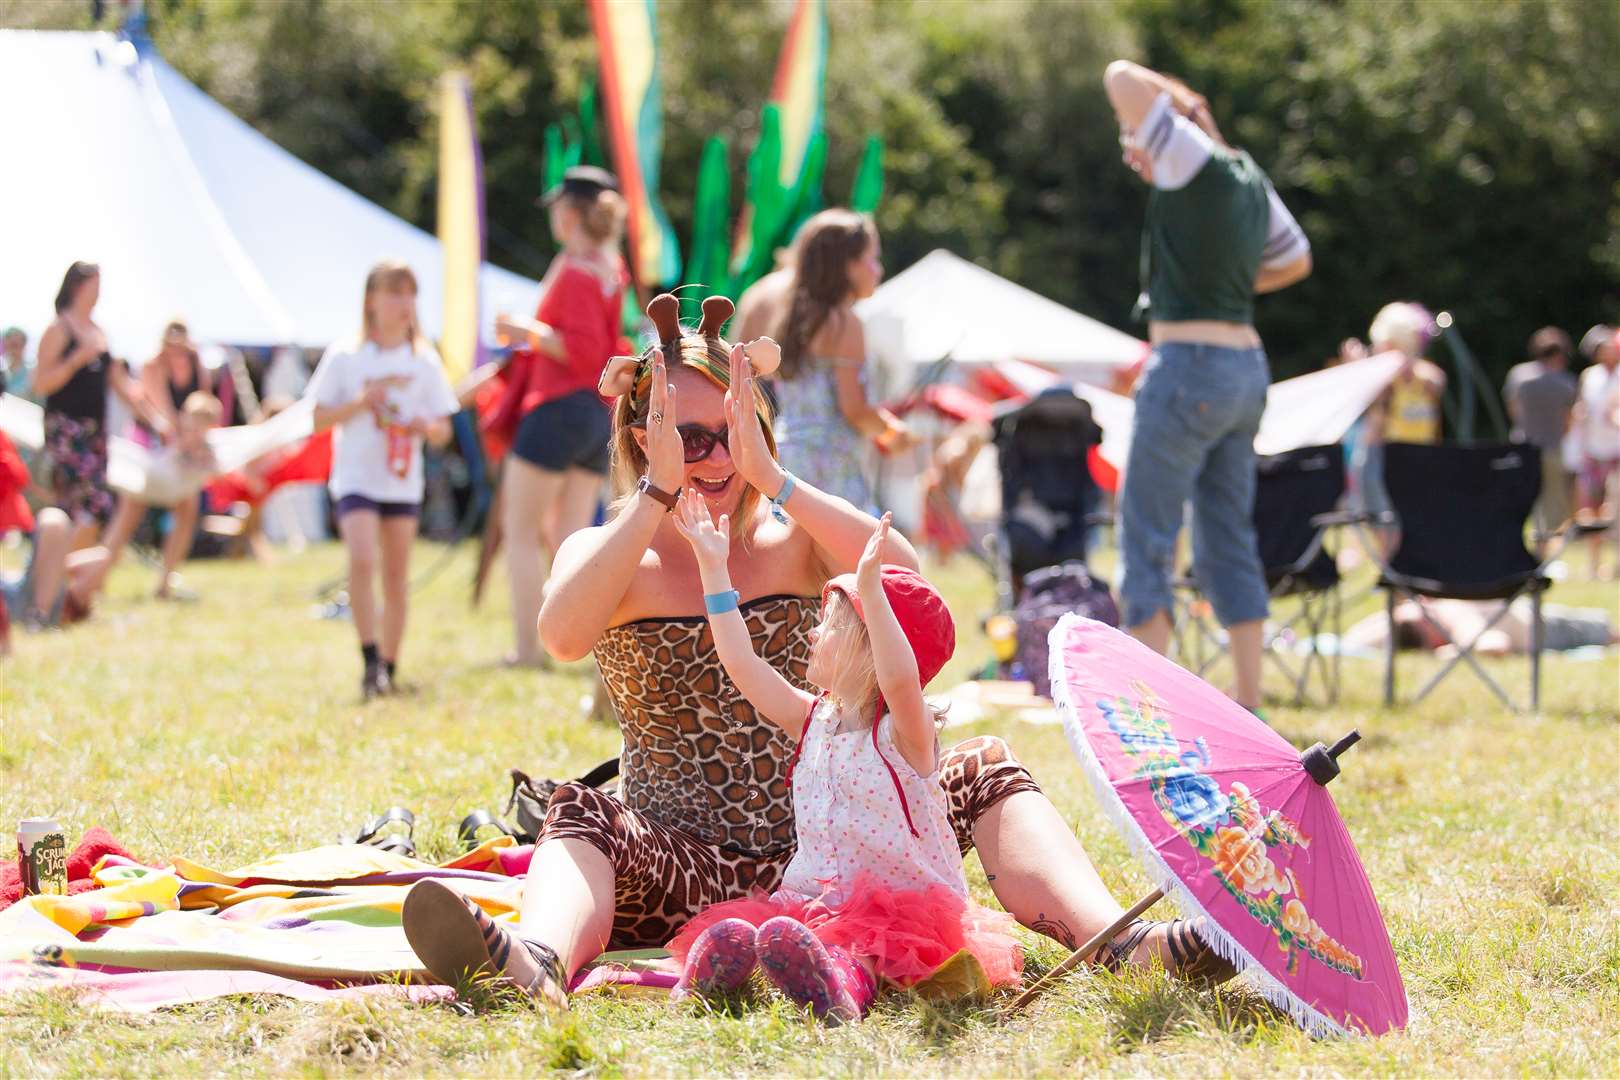 Chilled in a Field Festival is coming to the Hop Farm